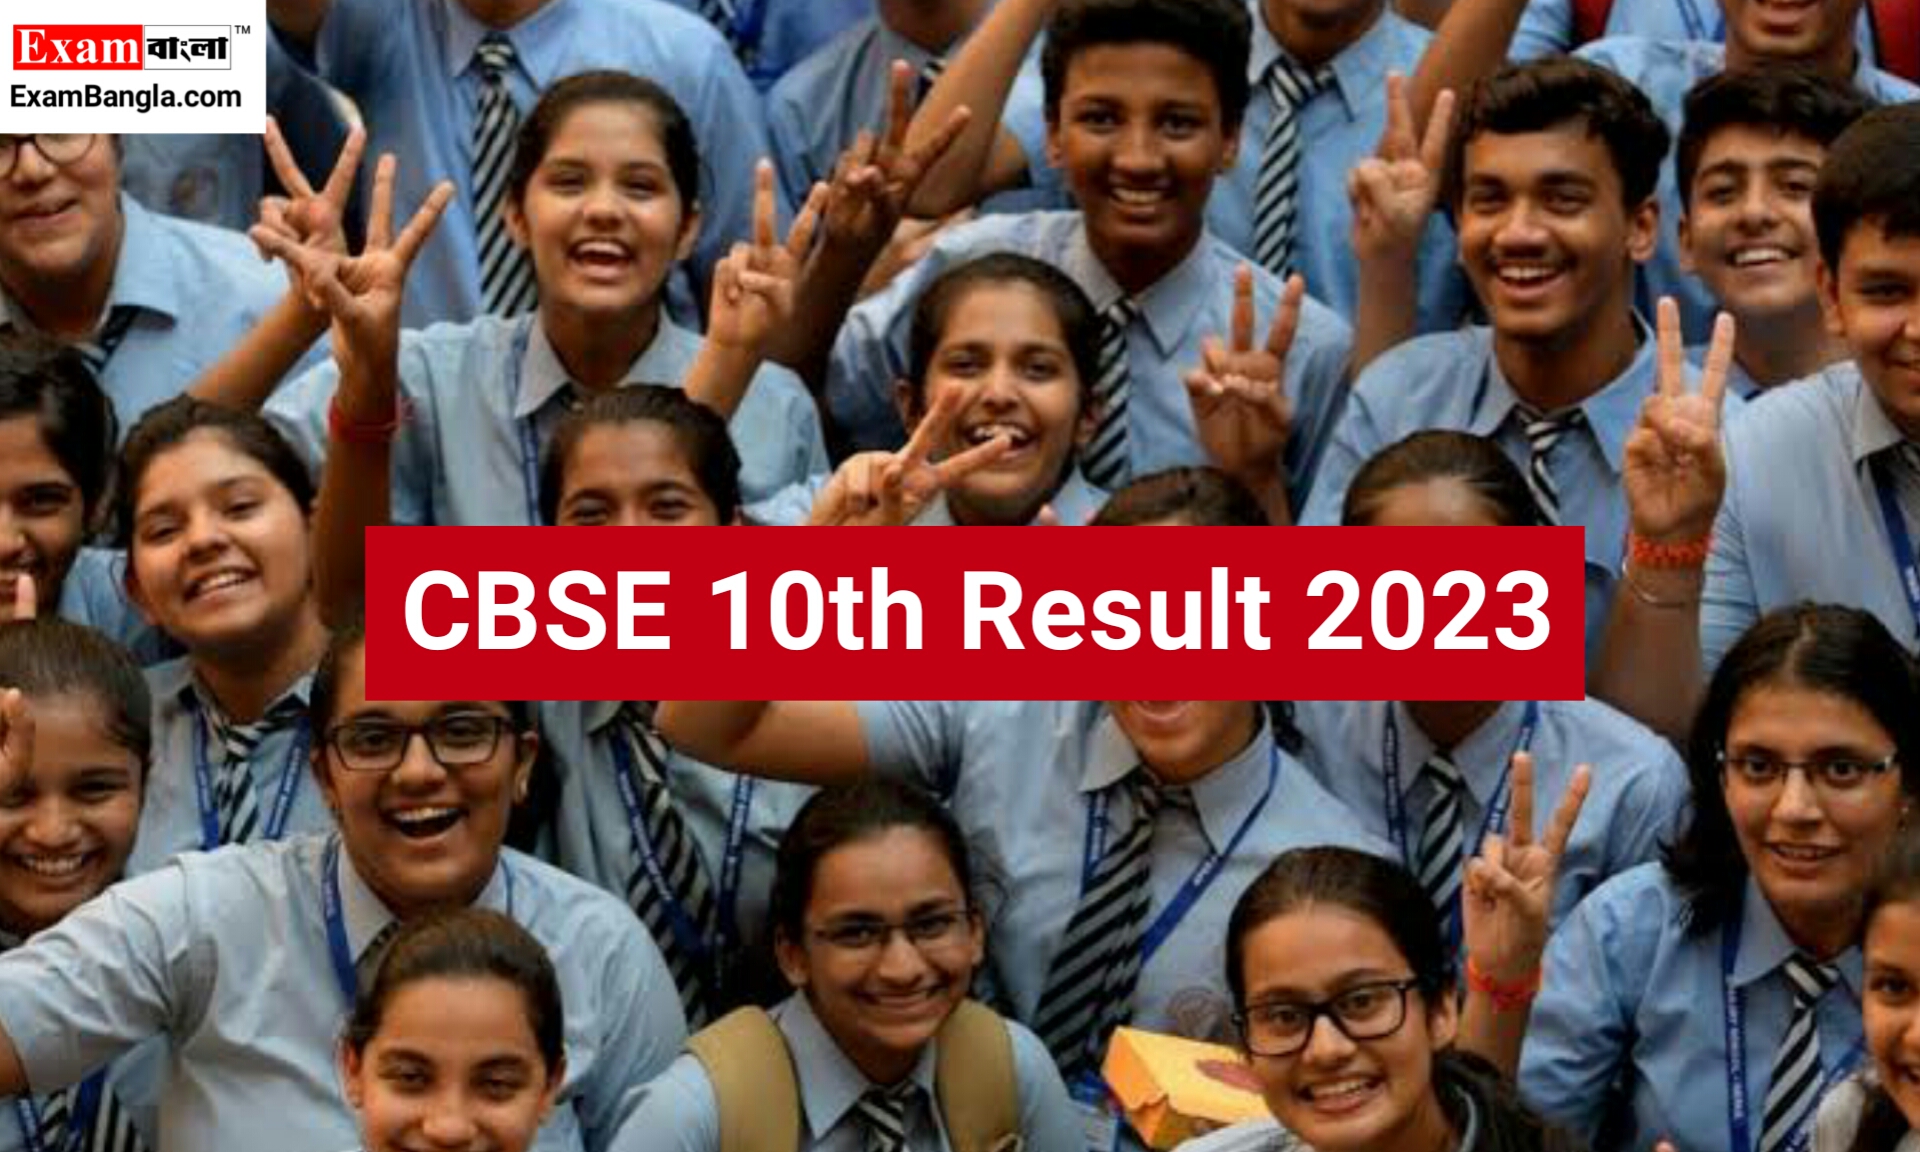 CBSE Results 2023